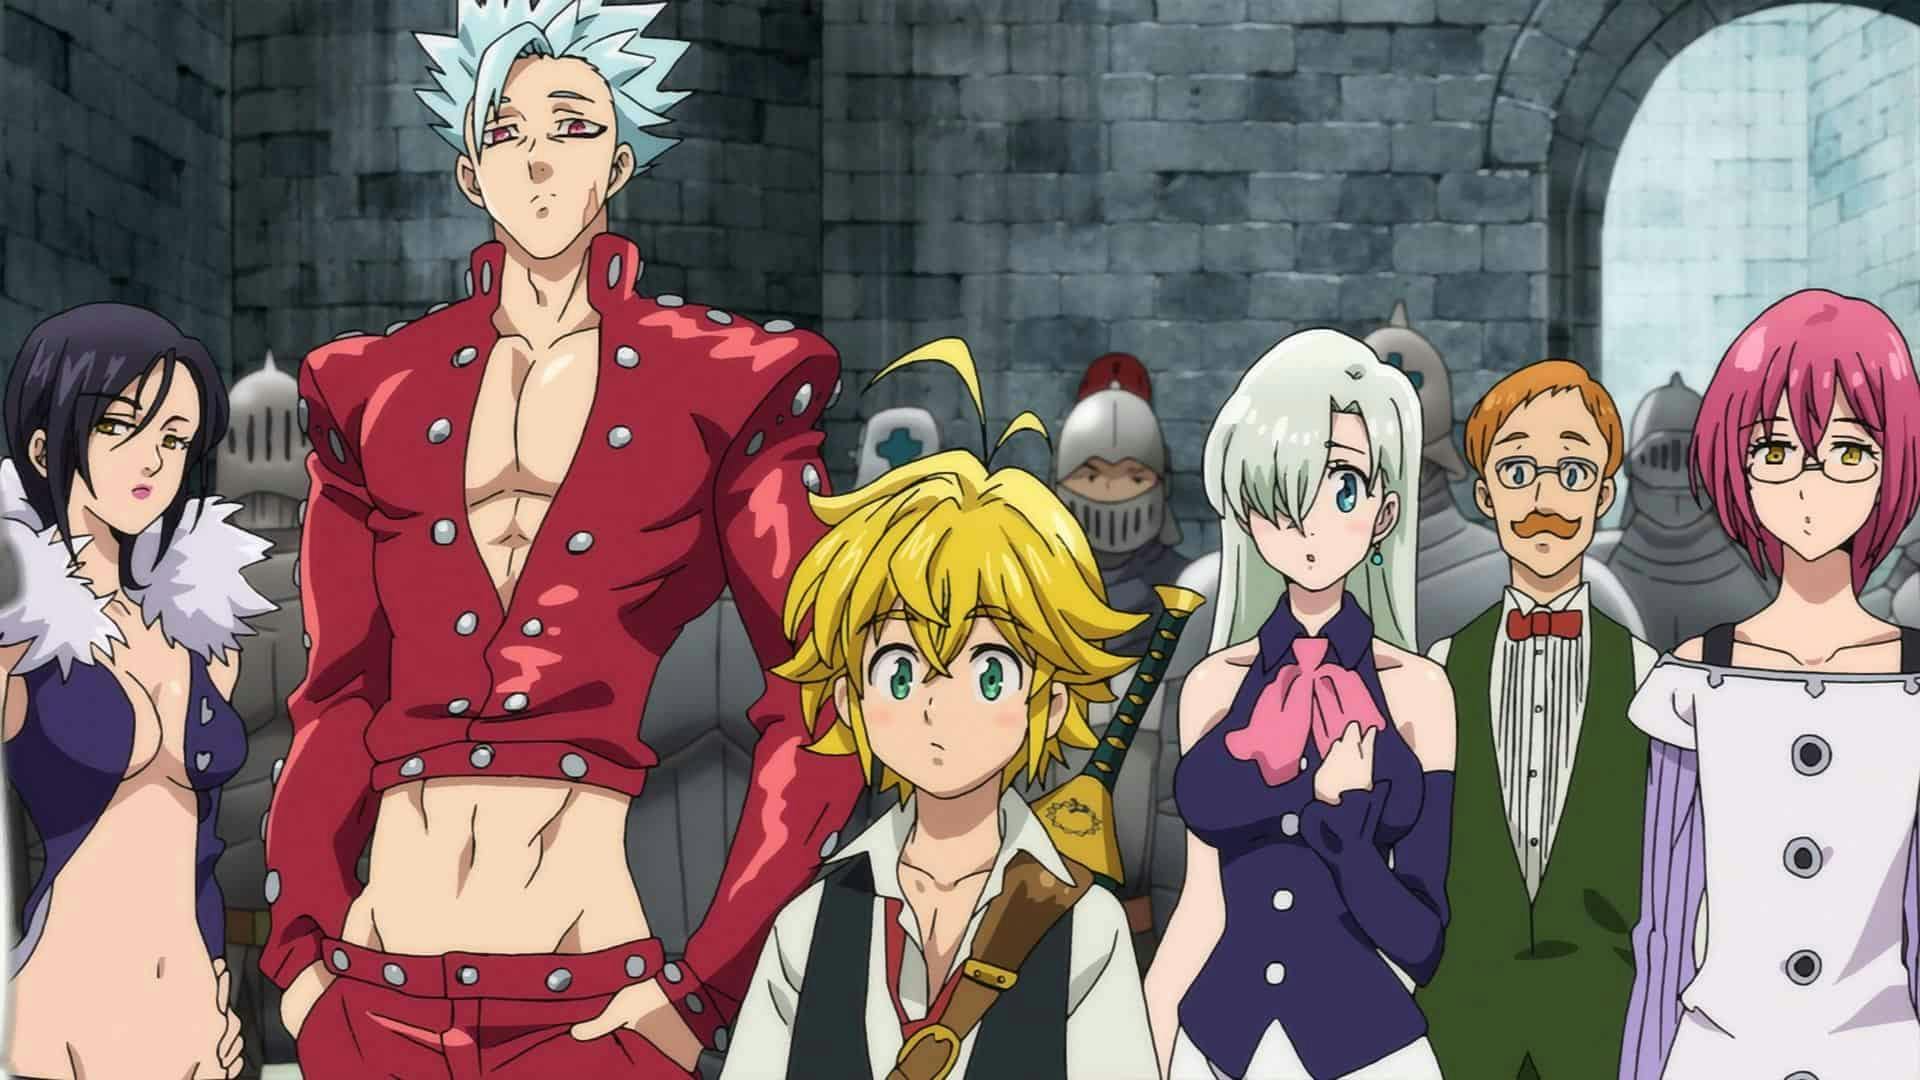 The Seven Deadly Sins background image